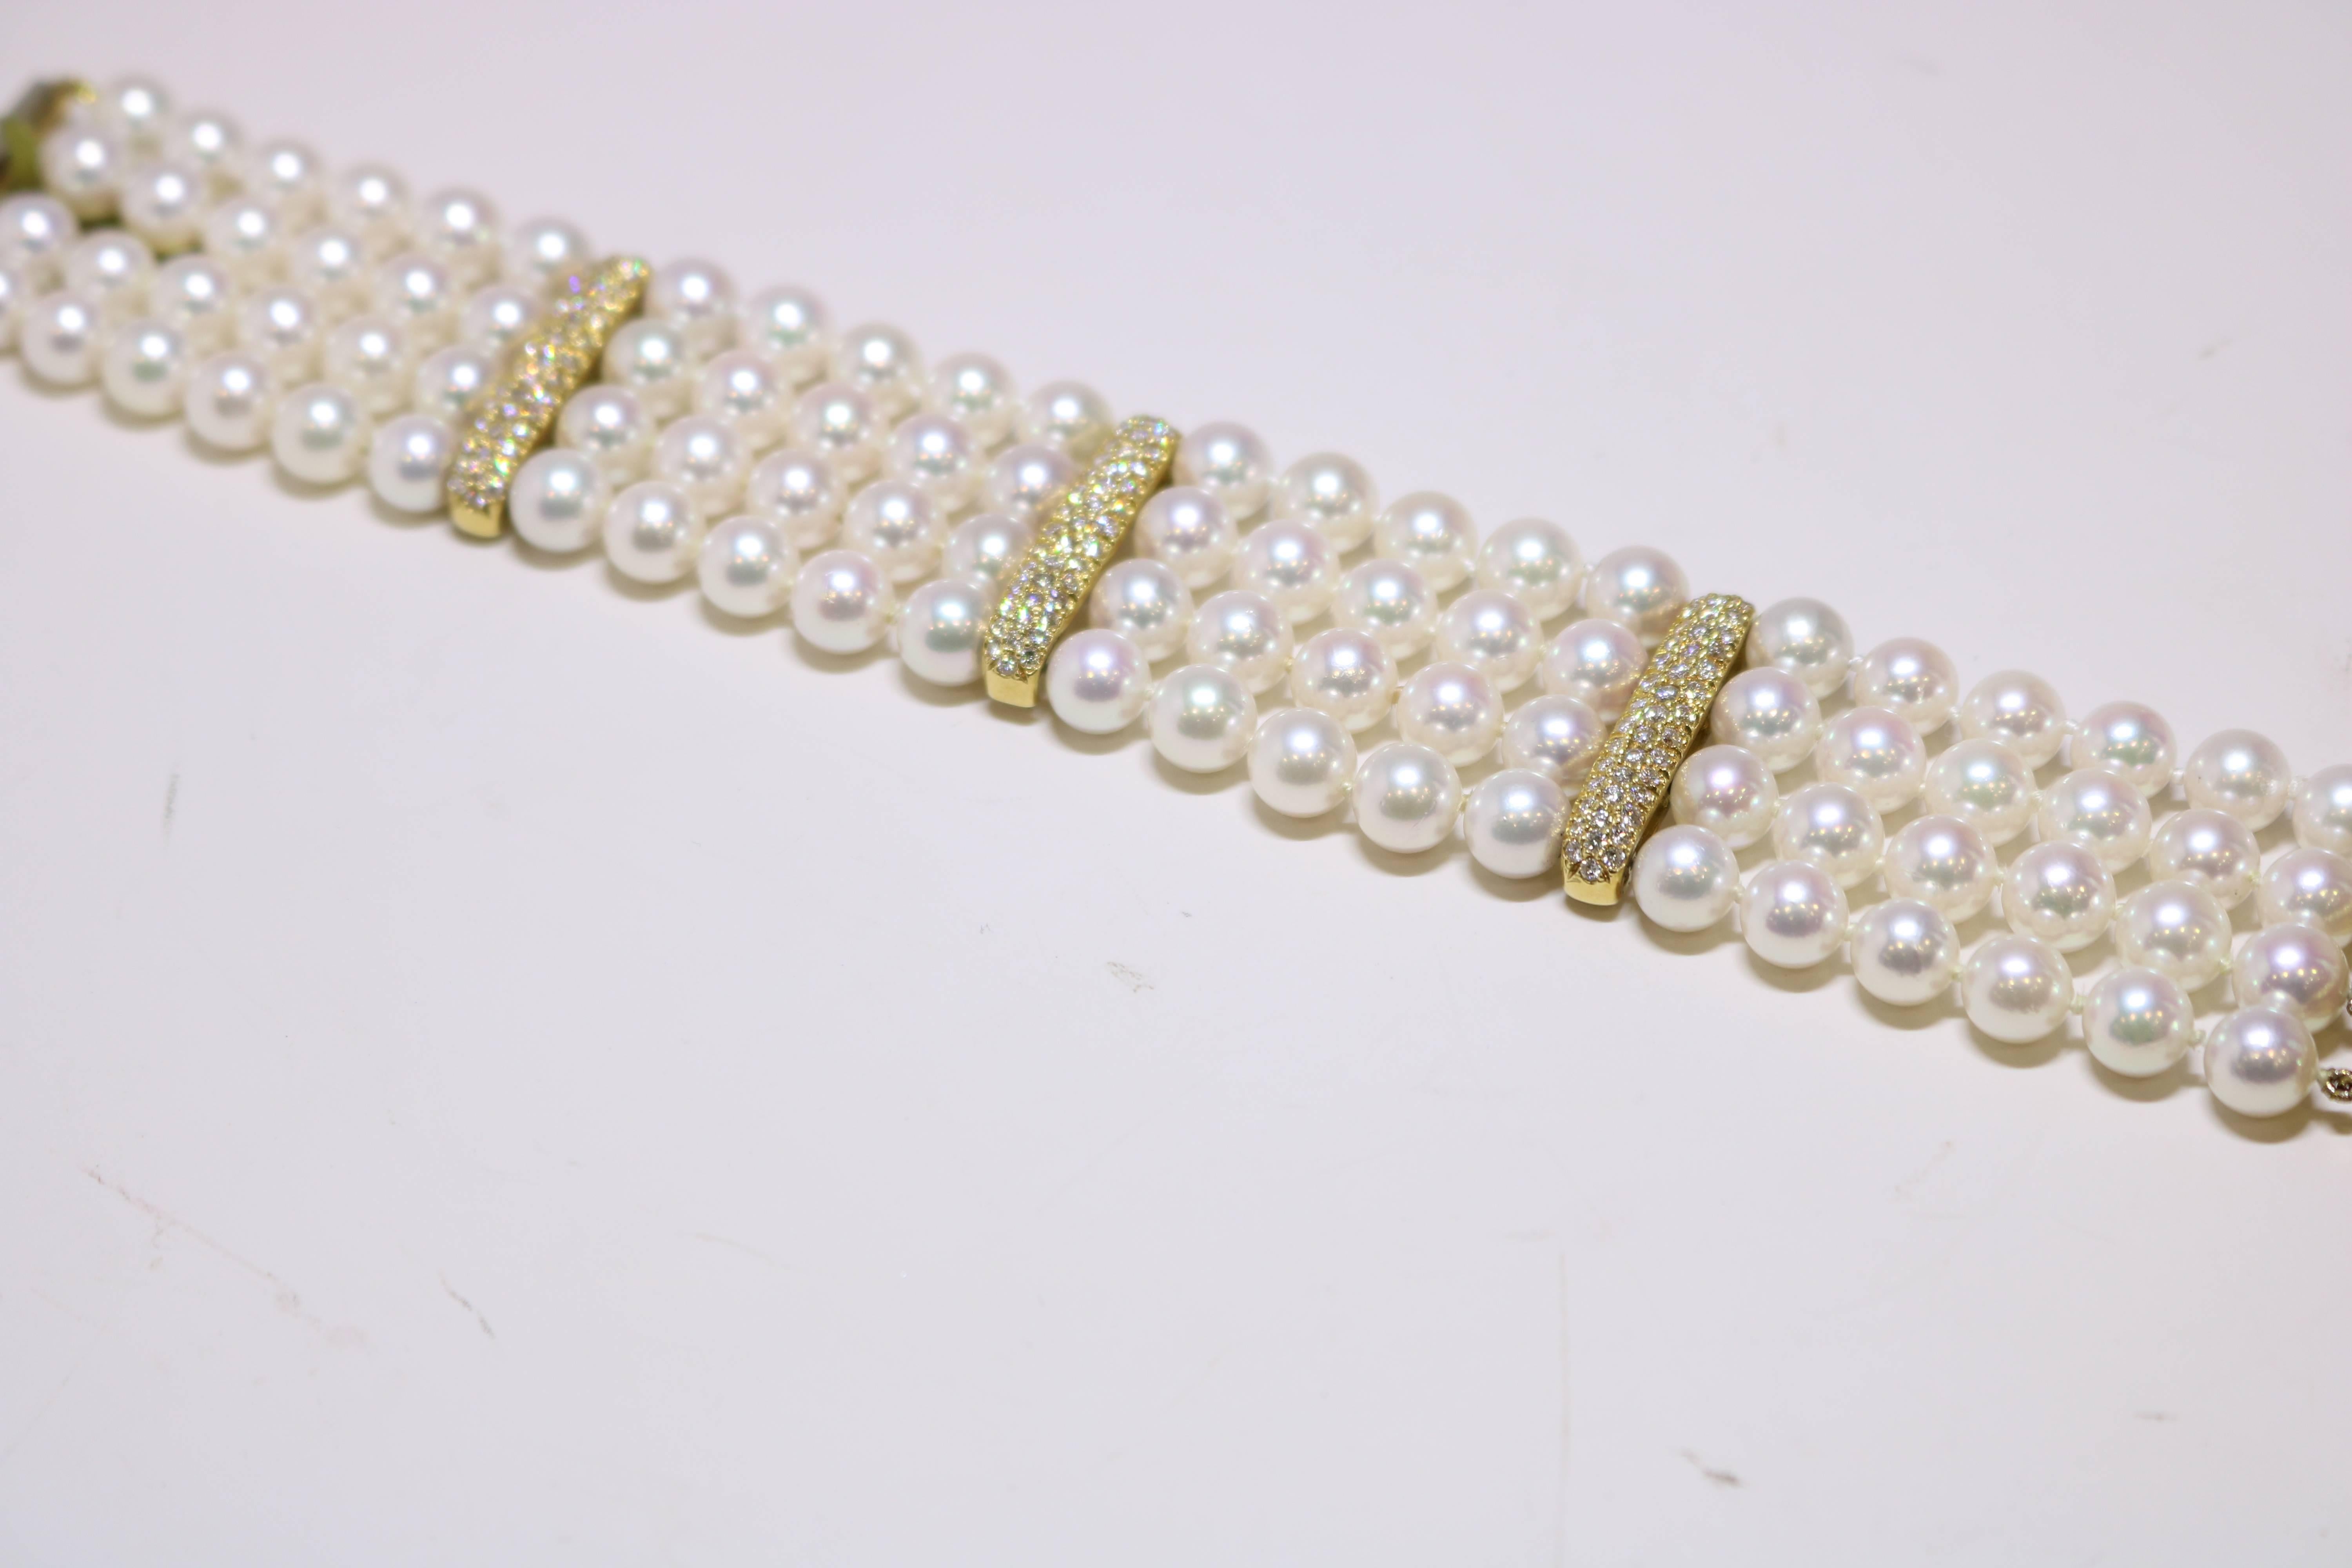 This exquisite bracelet is in 18k Yellow Gold features 3.35 Diamond, pave set, 4 rows akoya in 7-71/2 mm pearls, light rose color.